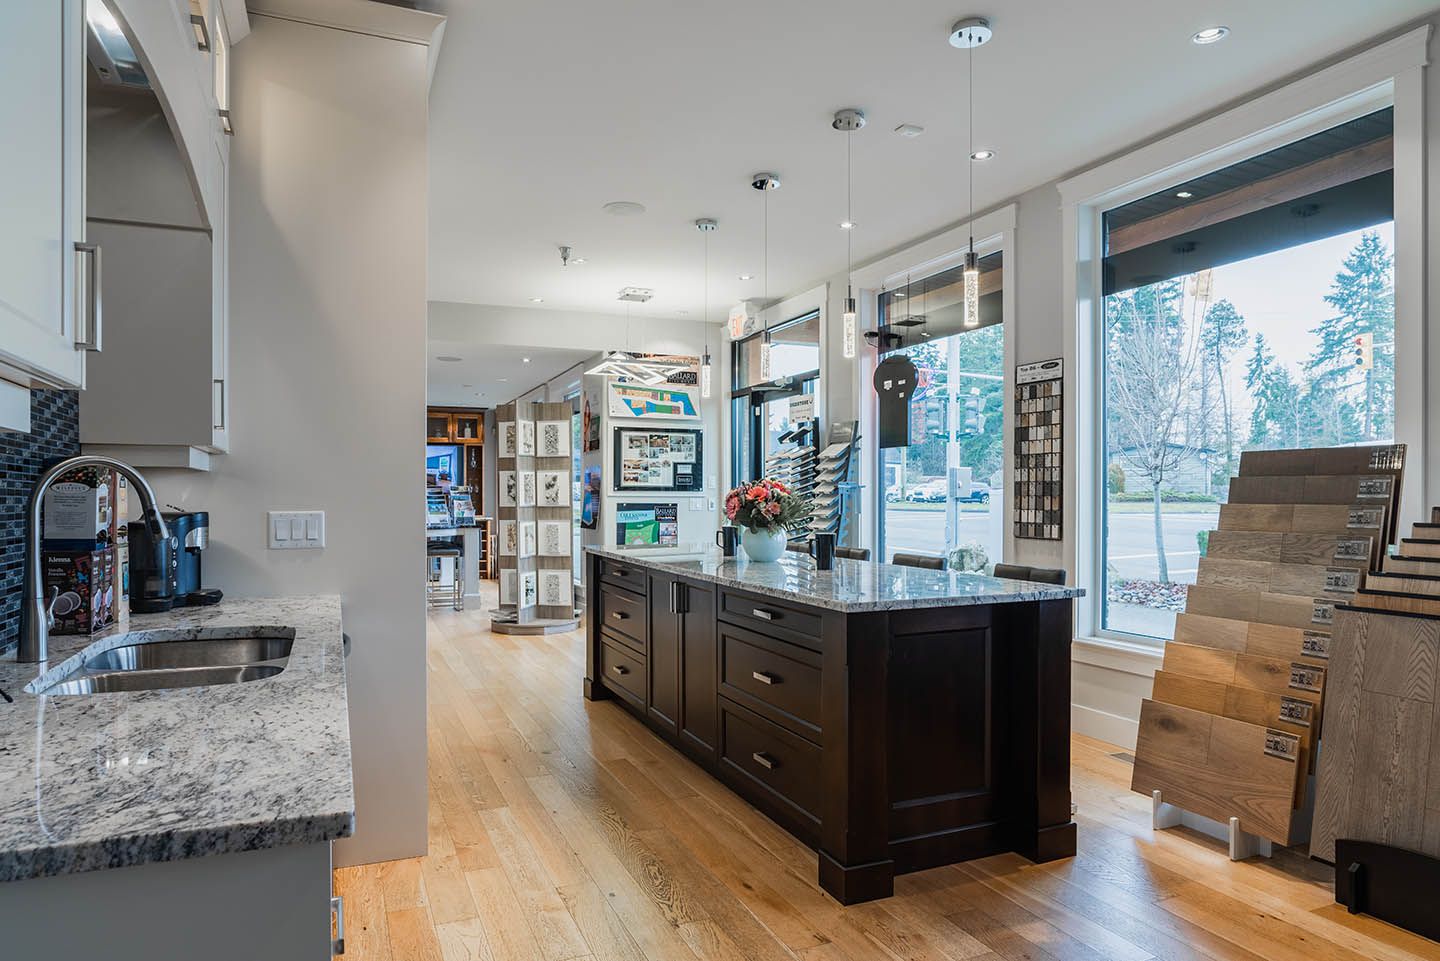 Interior of Ballard Fine Homes showroom showing bathroom fixture samples and large cabinet